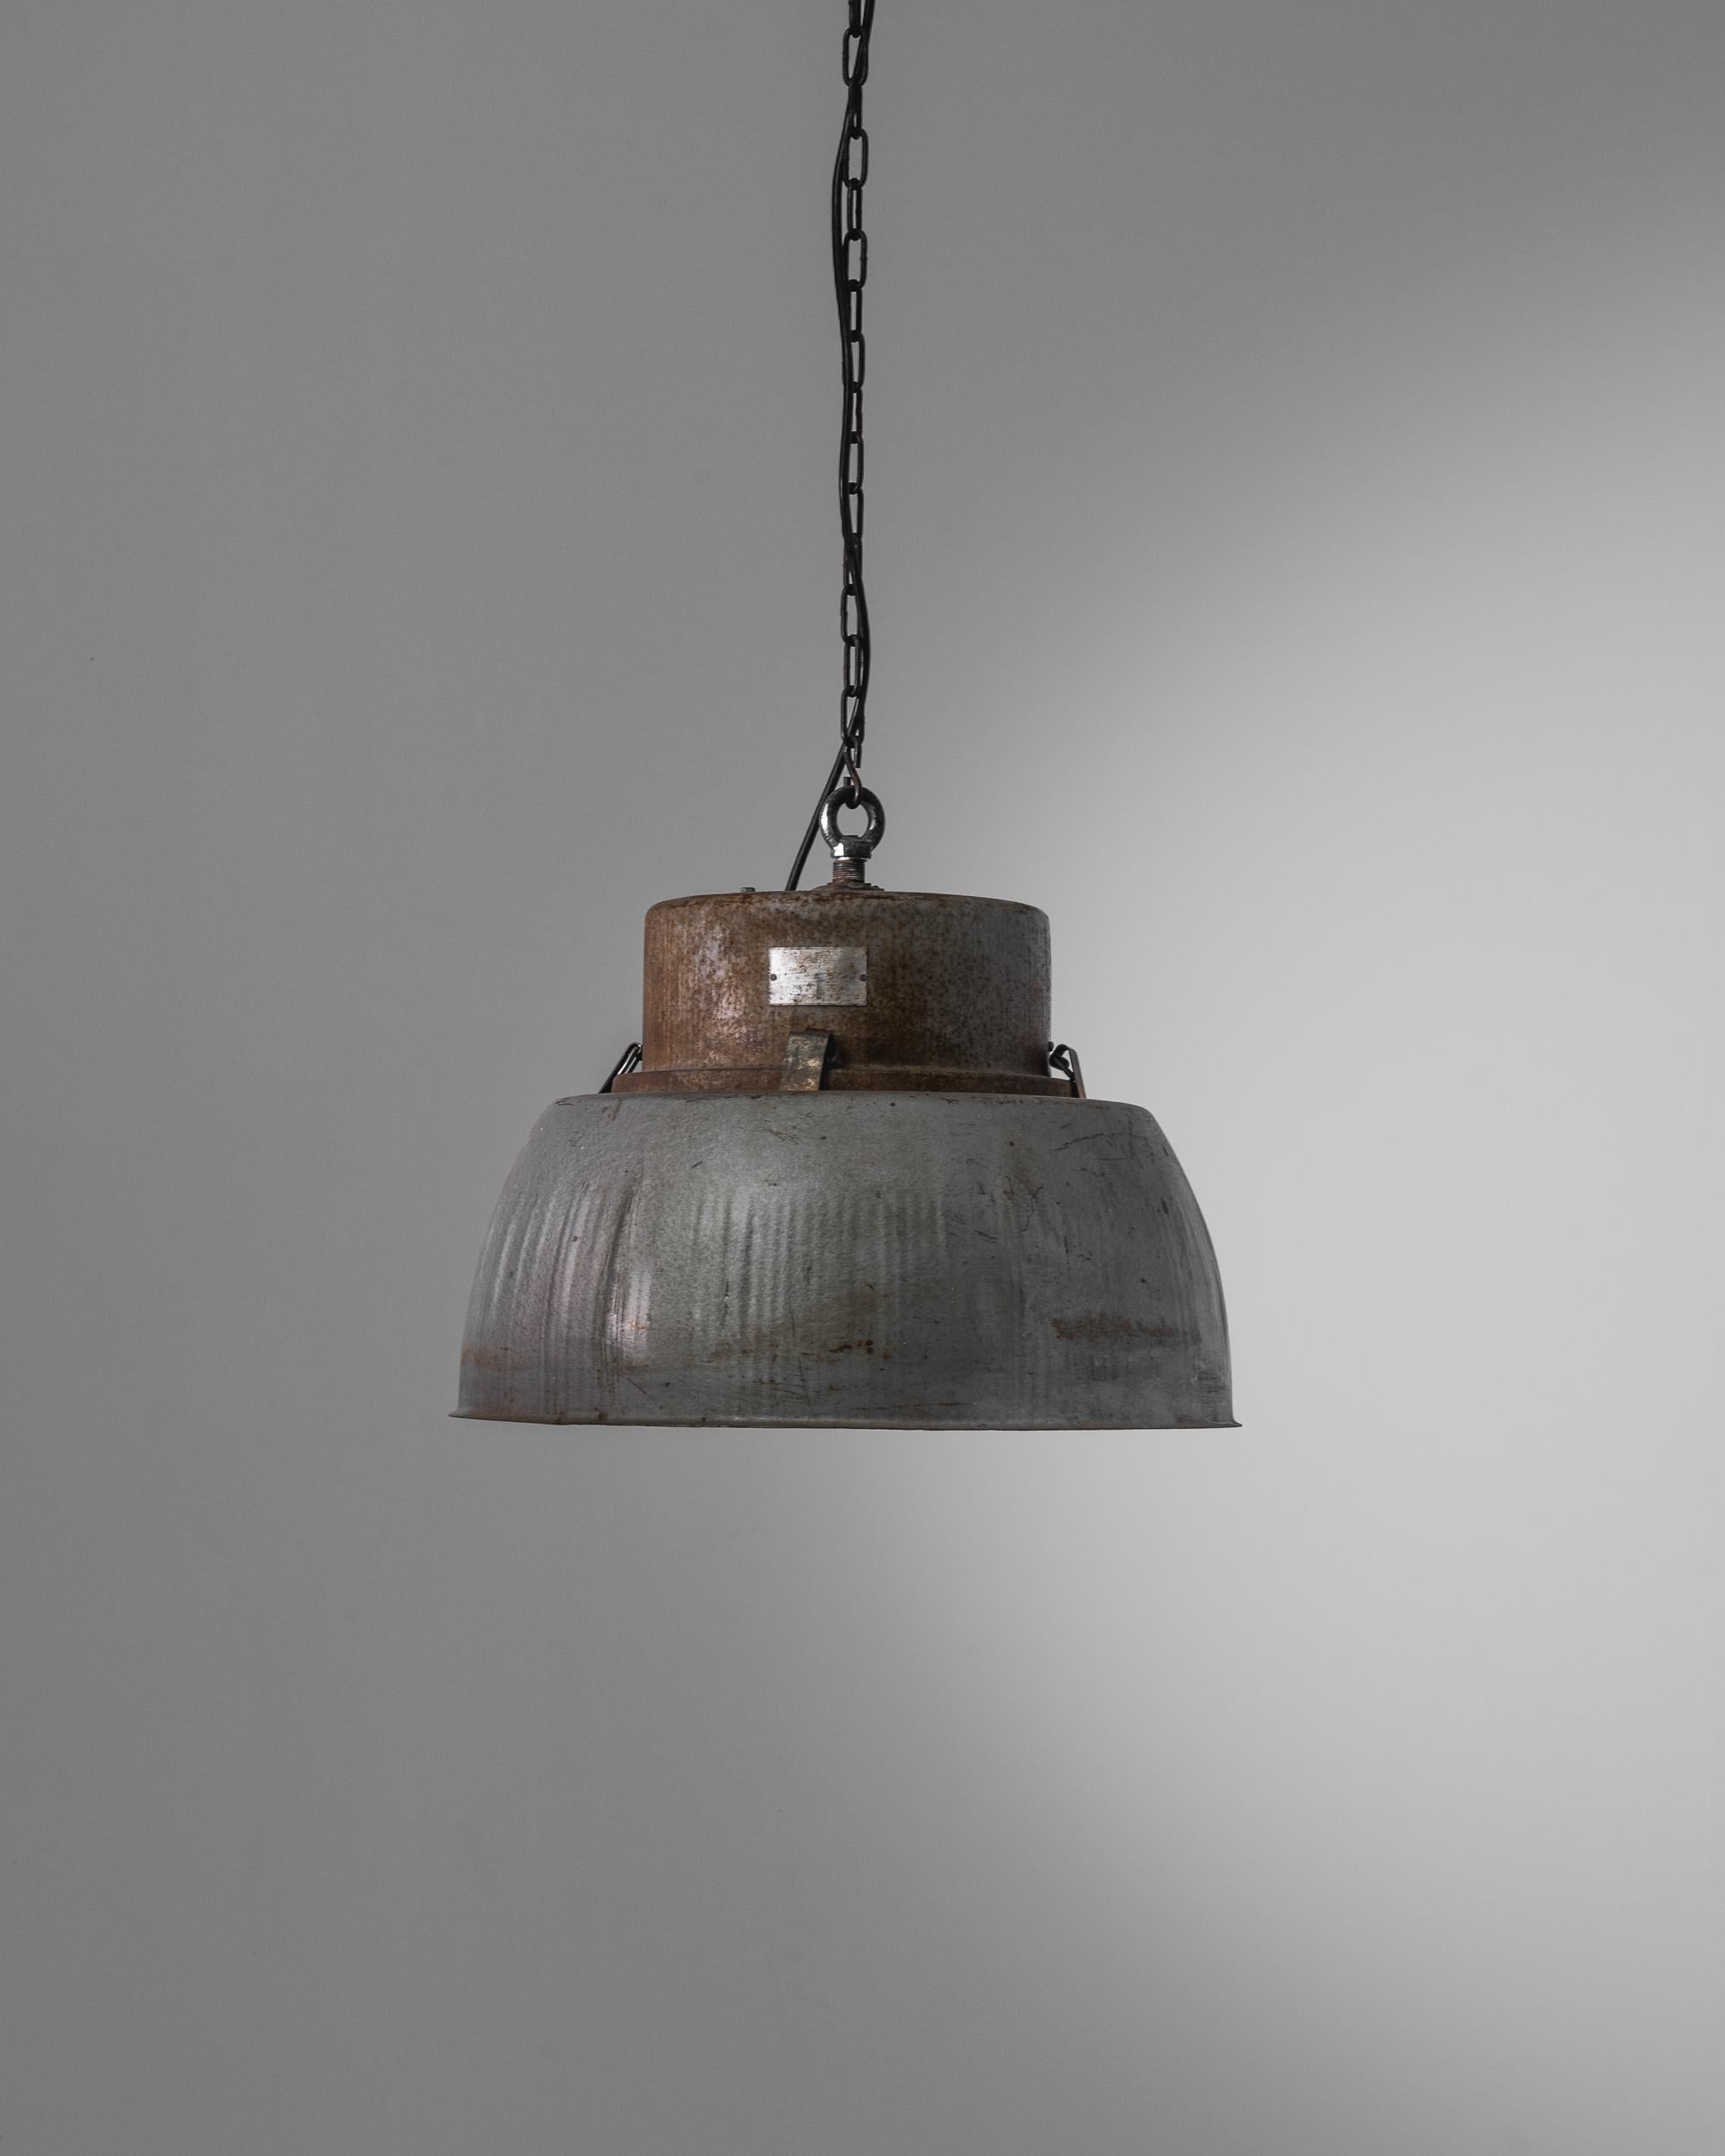 Bare essential lighting from the mid-20th century. Used in industry and lifted up by design champions like Le Corbusier. Originally designed to serve the purposes of industry, durable metal and robust construction also satisfy our desire for a